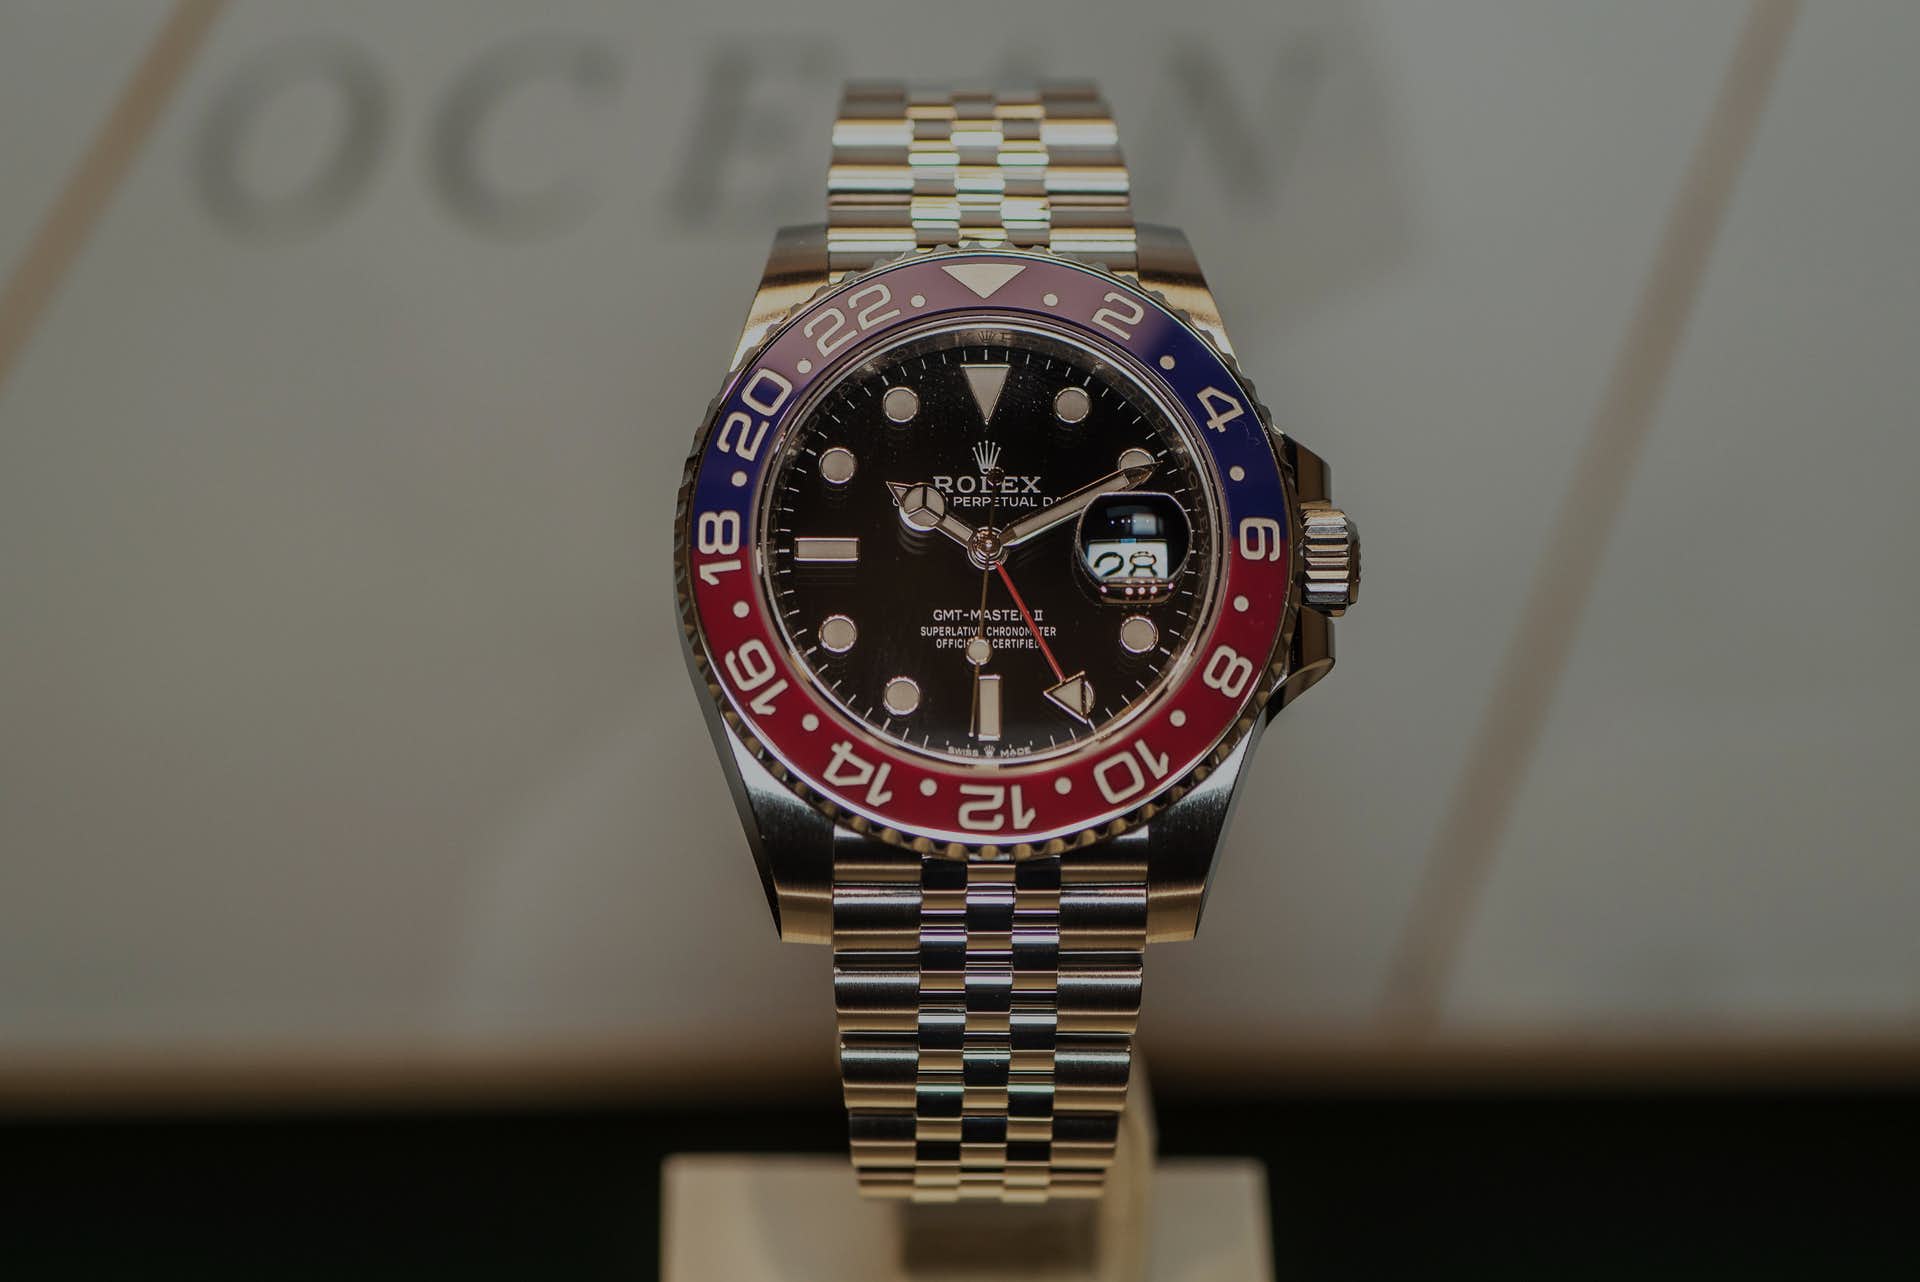 Baselworld 2018: The Rolex GMT-Master II Pepsi in stainless steel